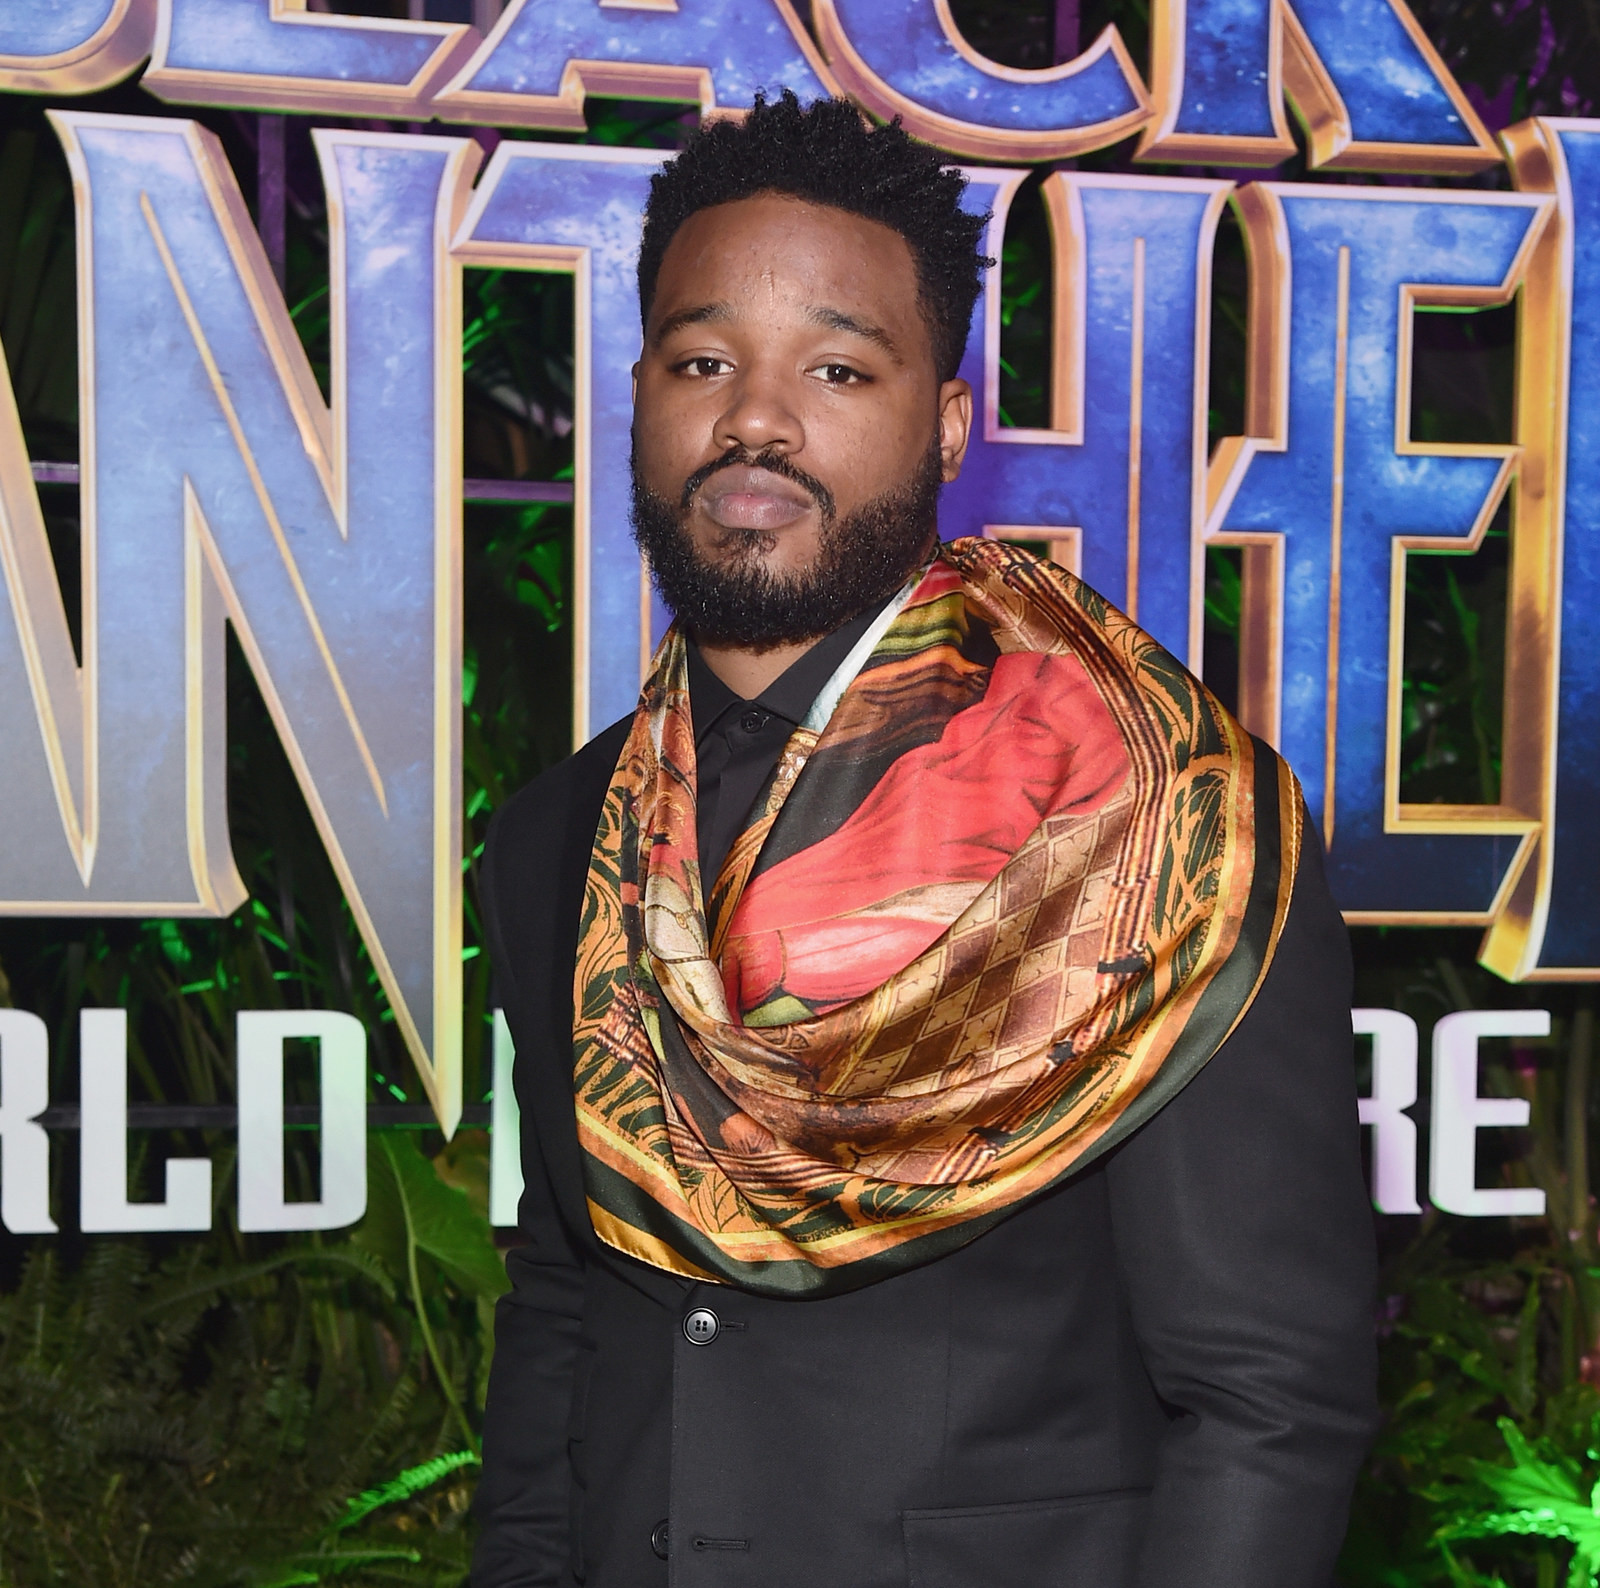 Hell, even the director, Ryan Coogler is FINE!!!